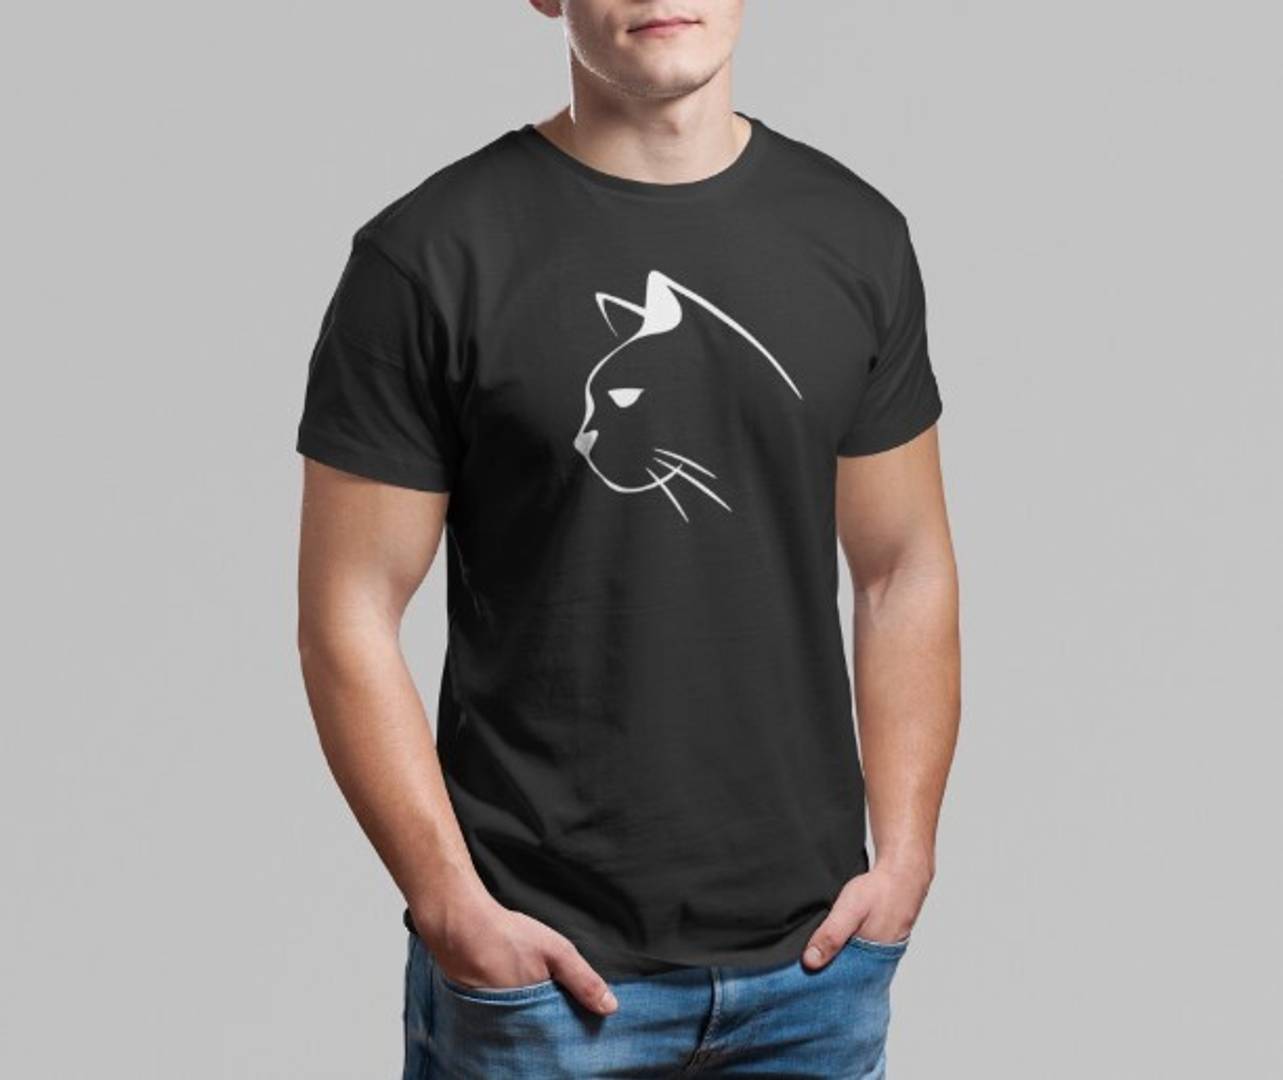 Cotton Tshirt Round Neck Angry Cat